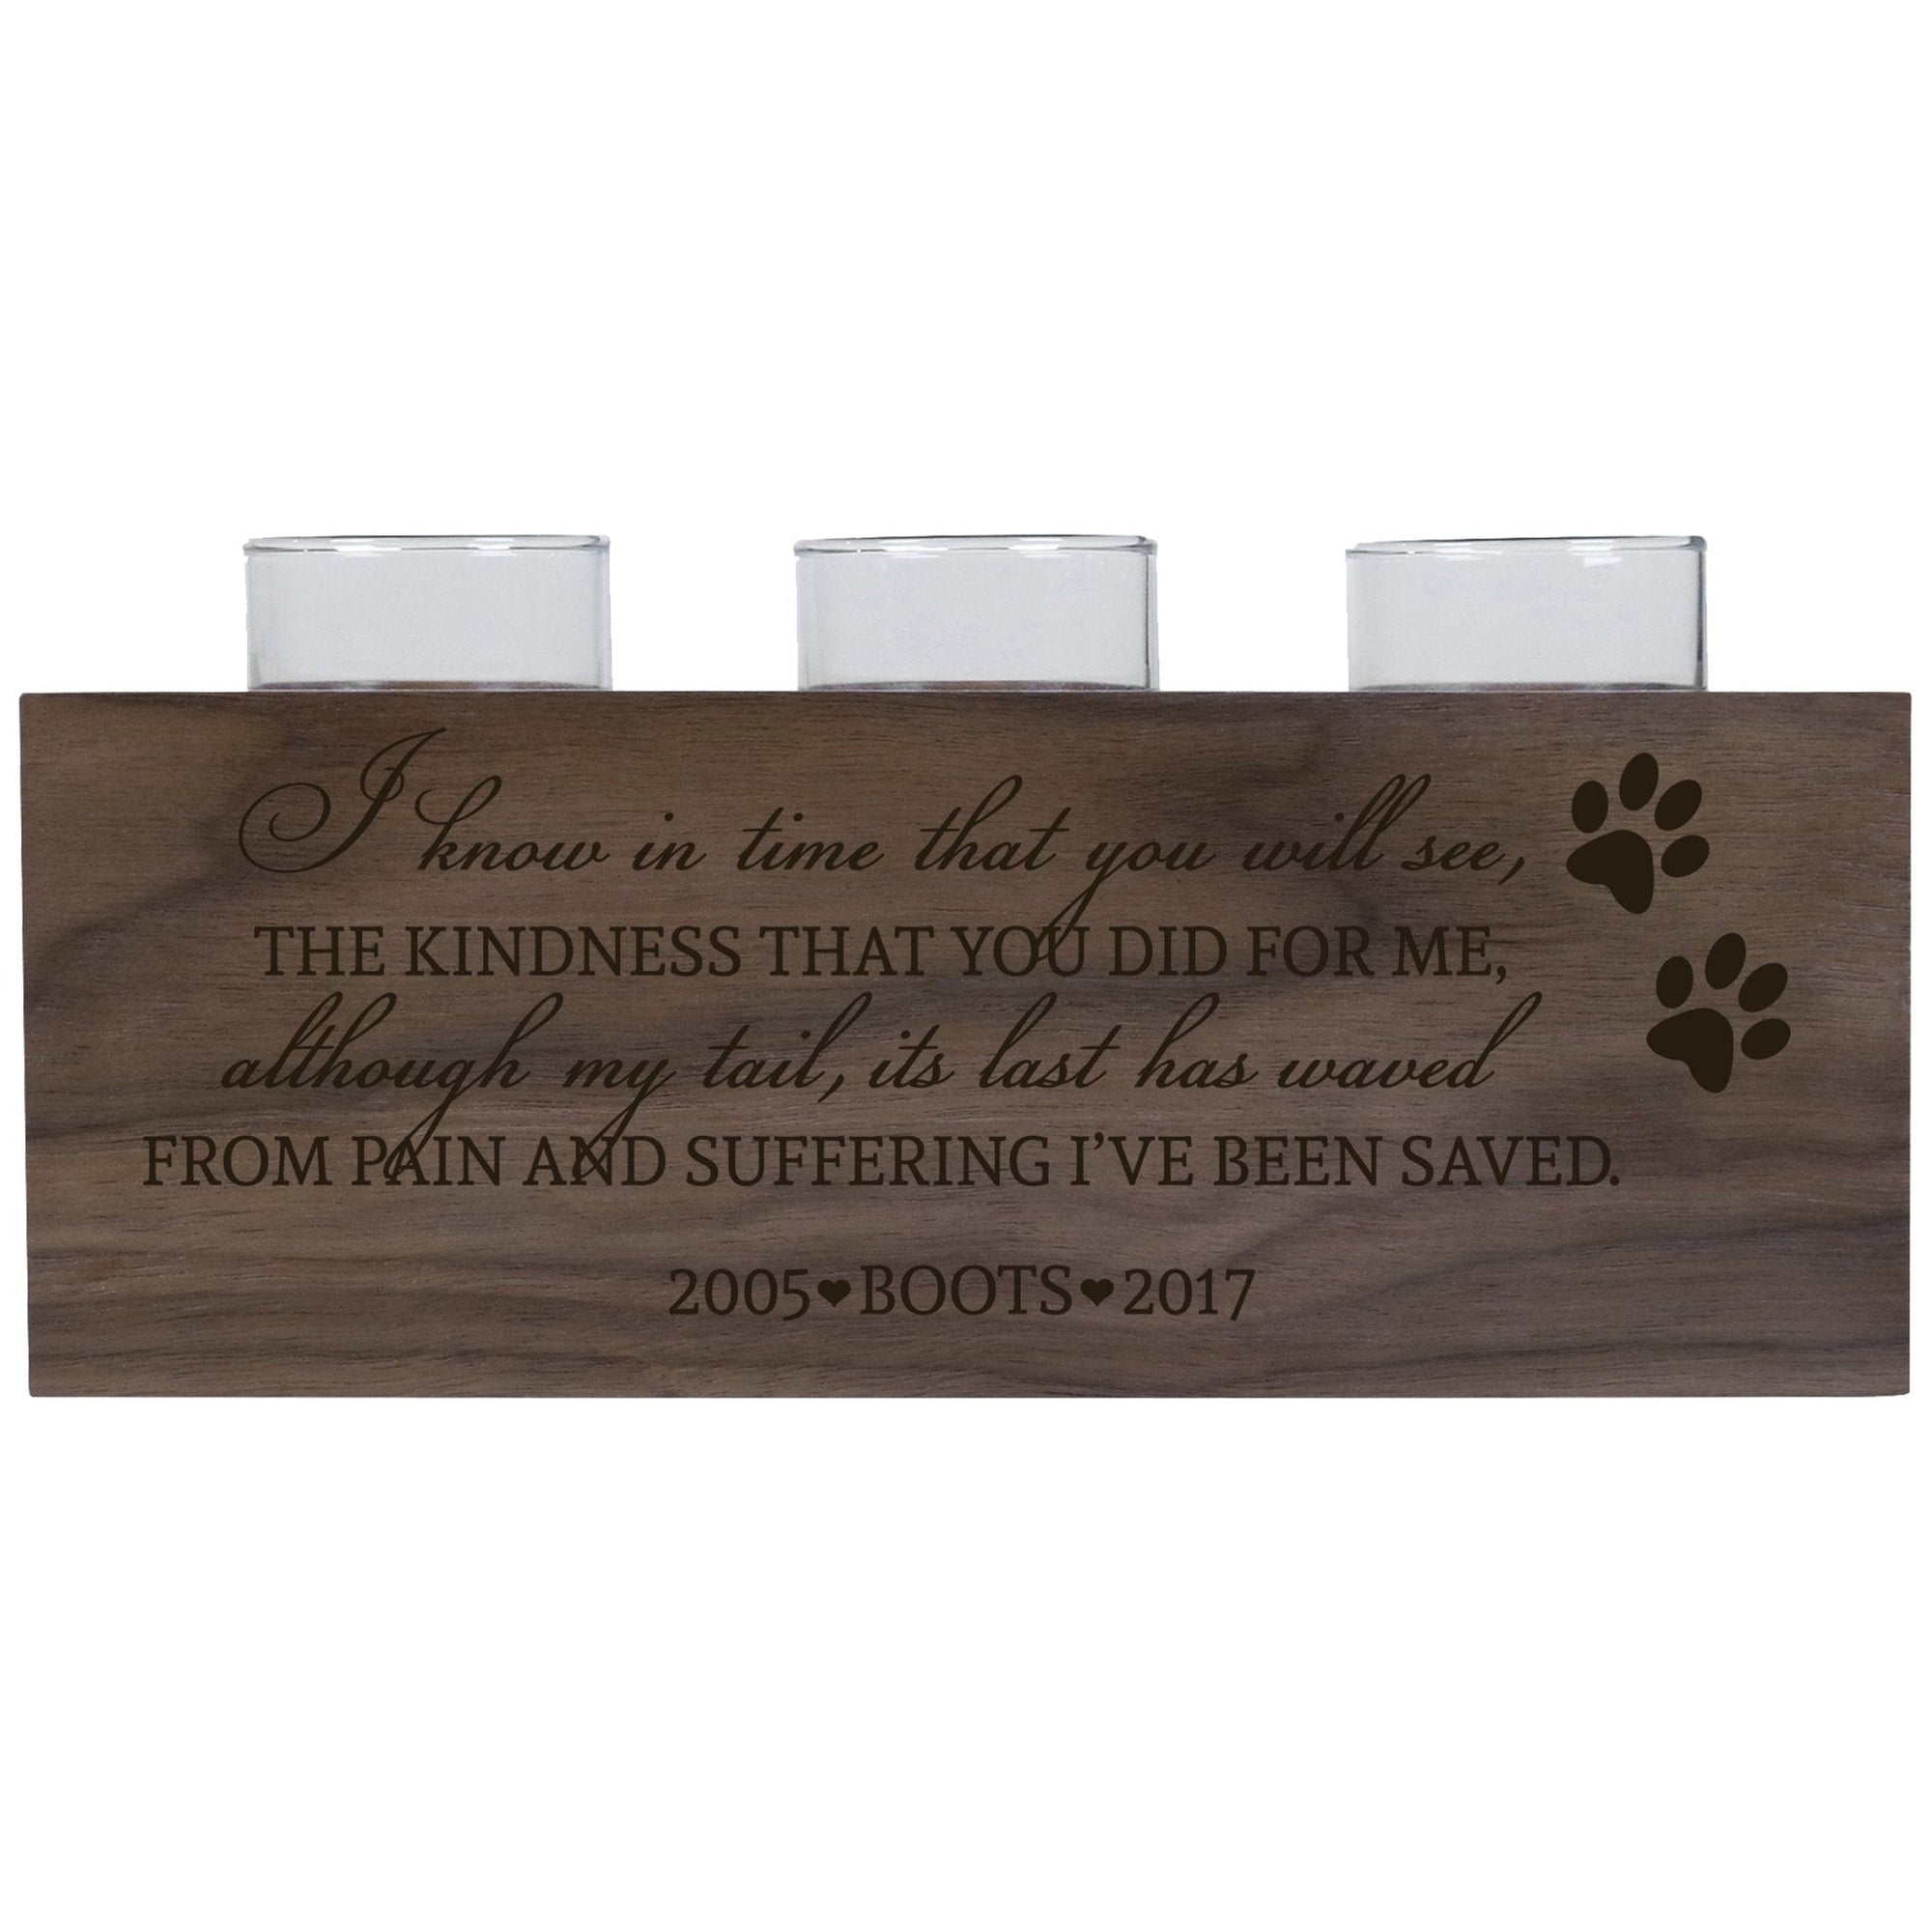 Pet Memorial 3-Hole Candle Holder - I Know In Time - LifeSong Milestones